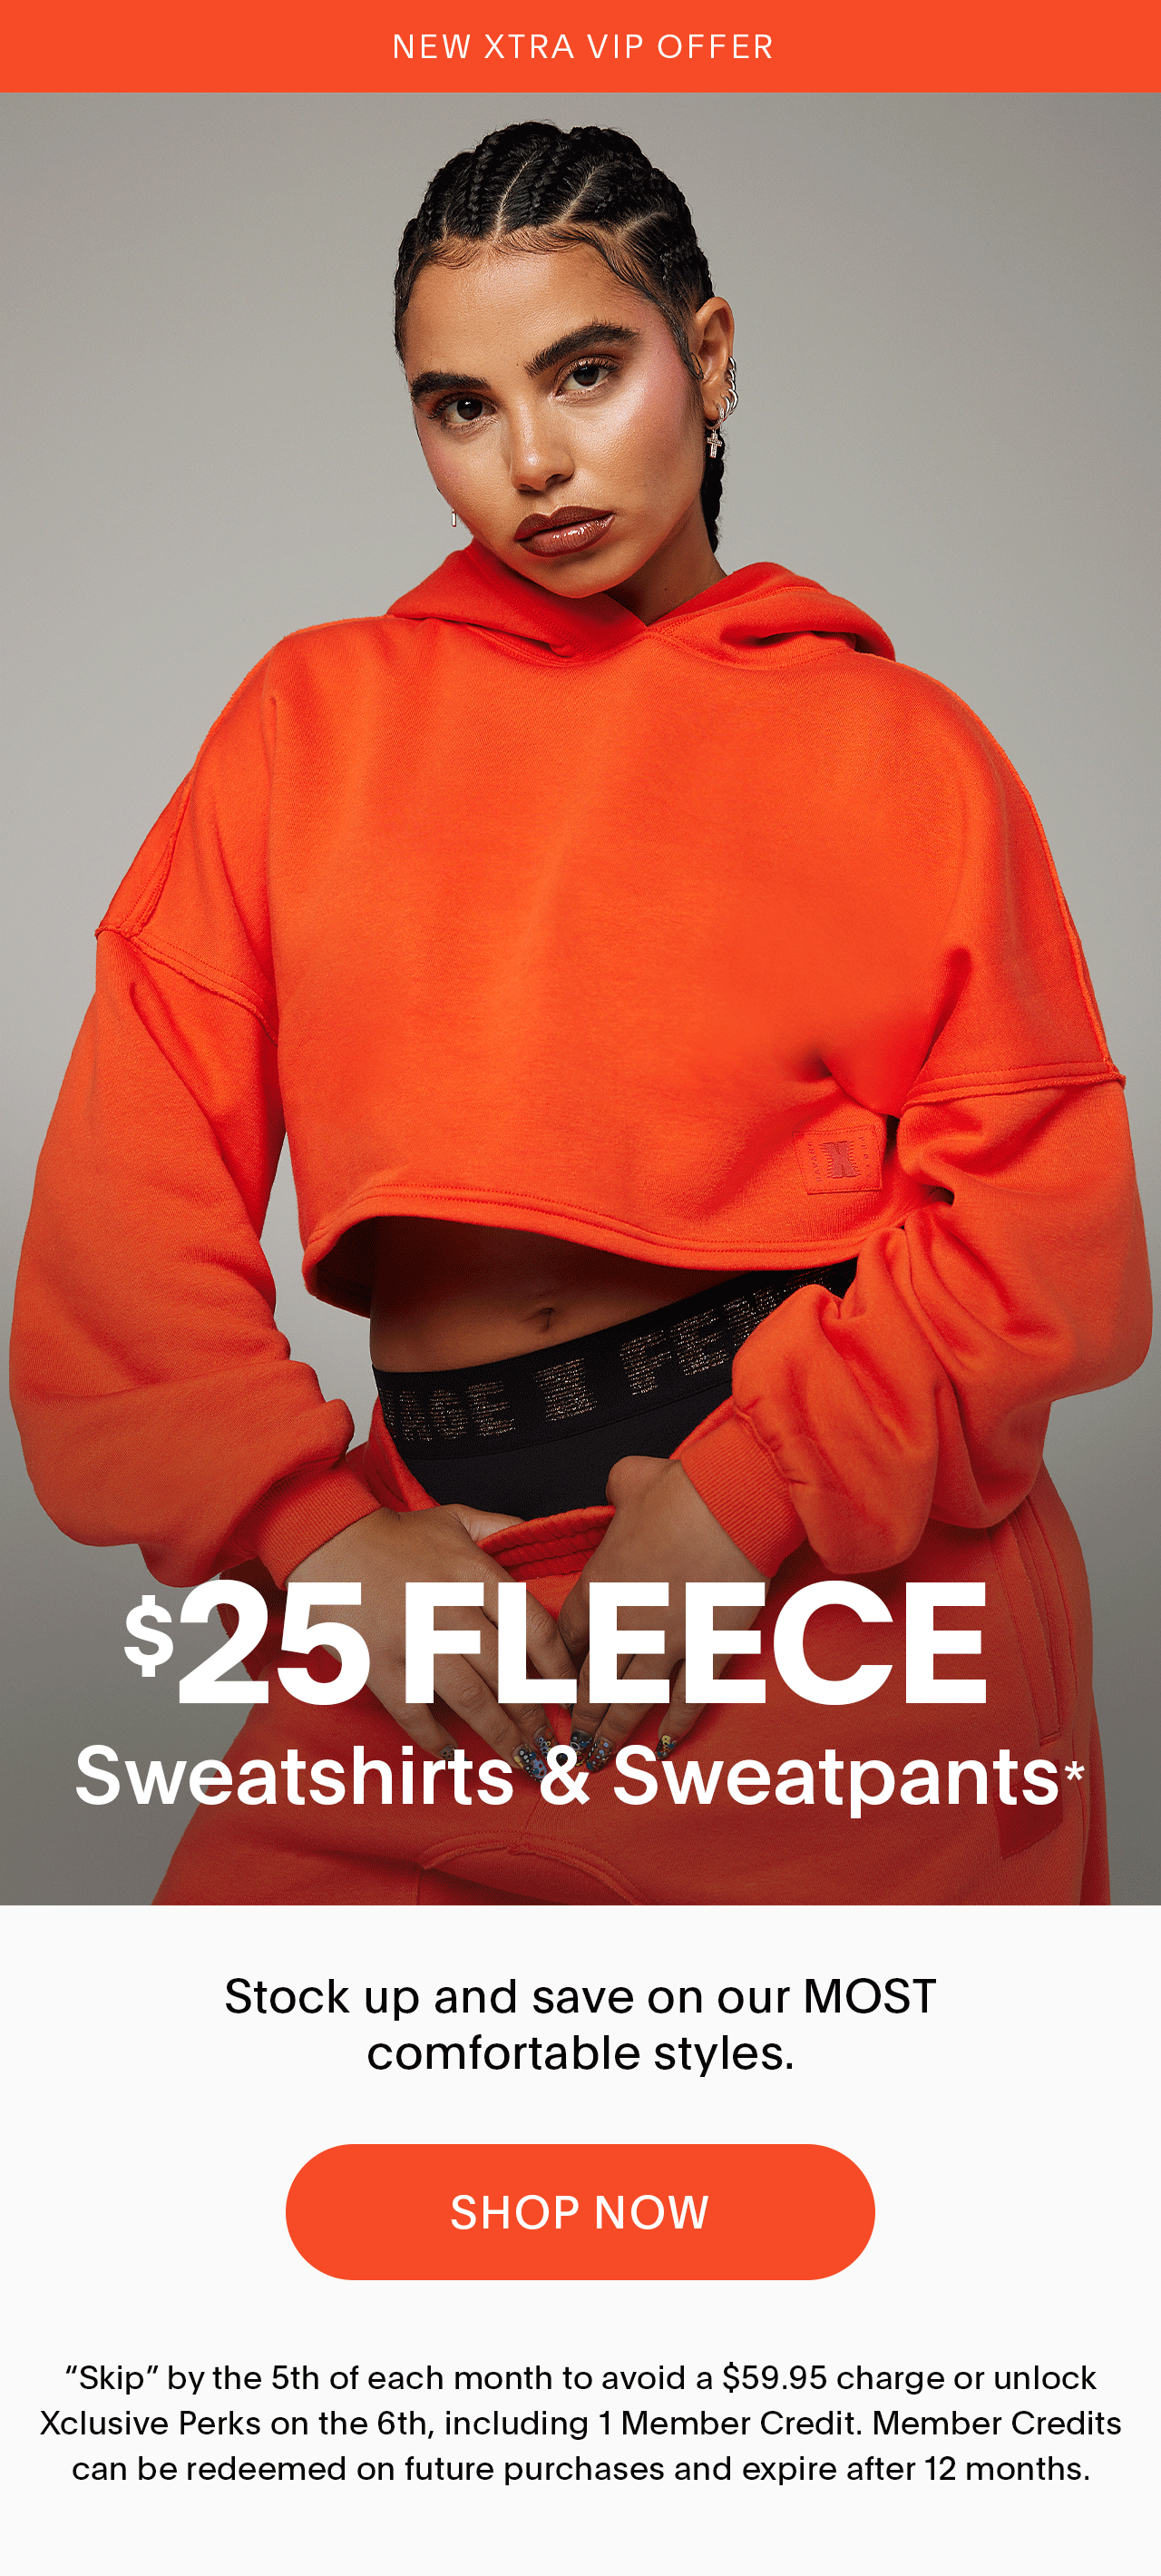 New Xtra VIP Offer \\$25 Fleece Sweatshirts and Sweatpants* Stock up and save on our MOST comfortable styles. 